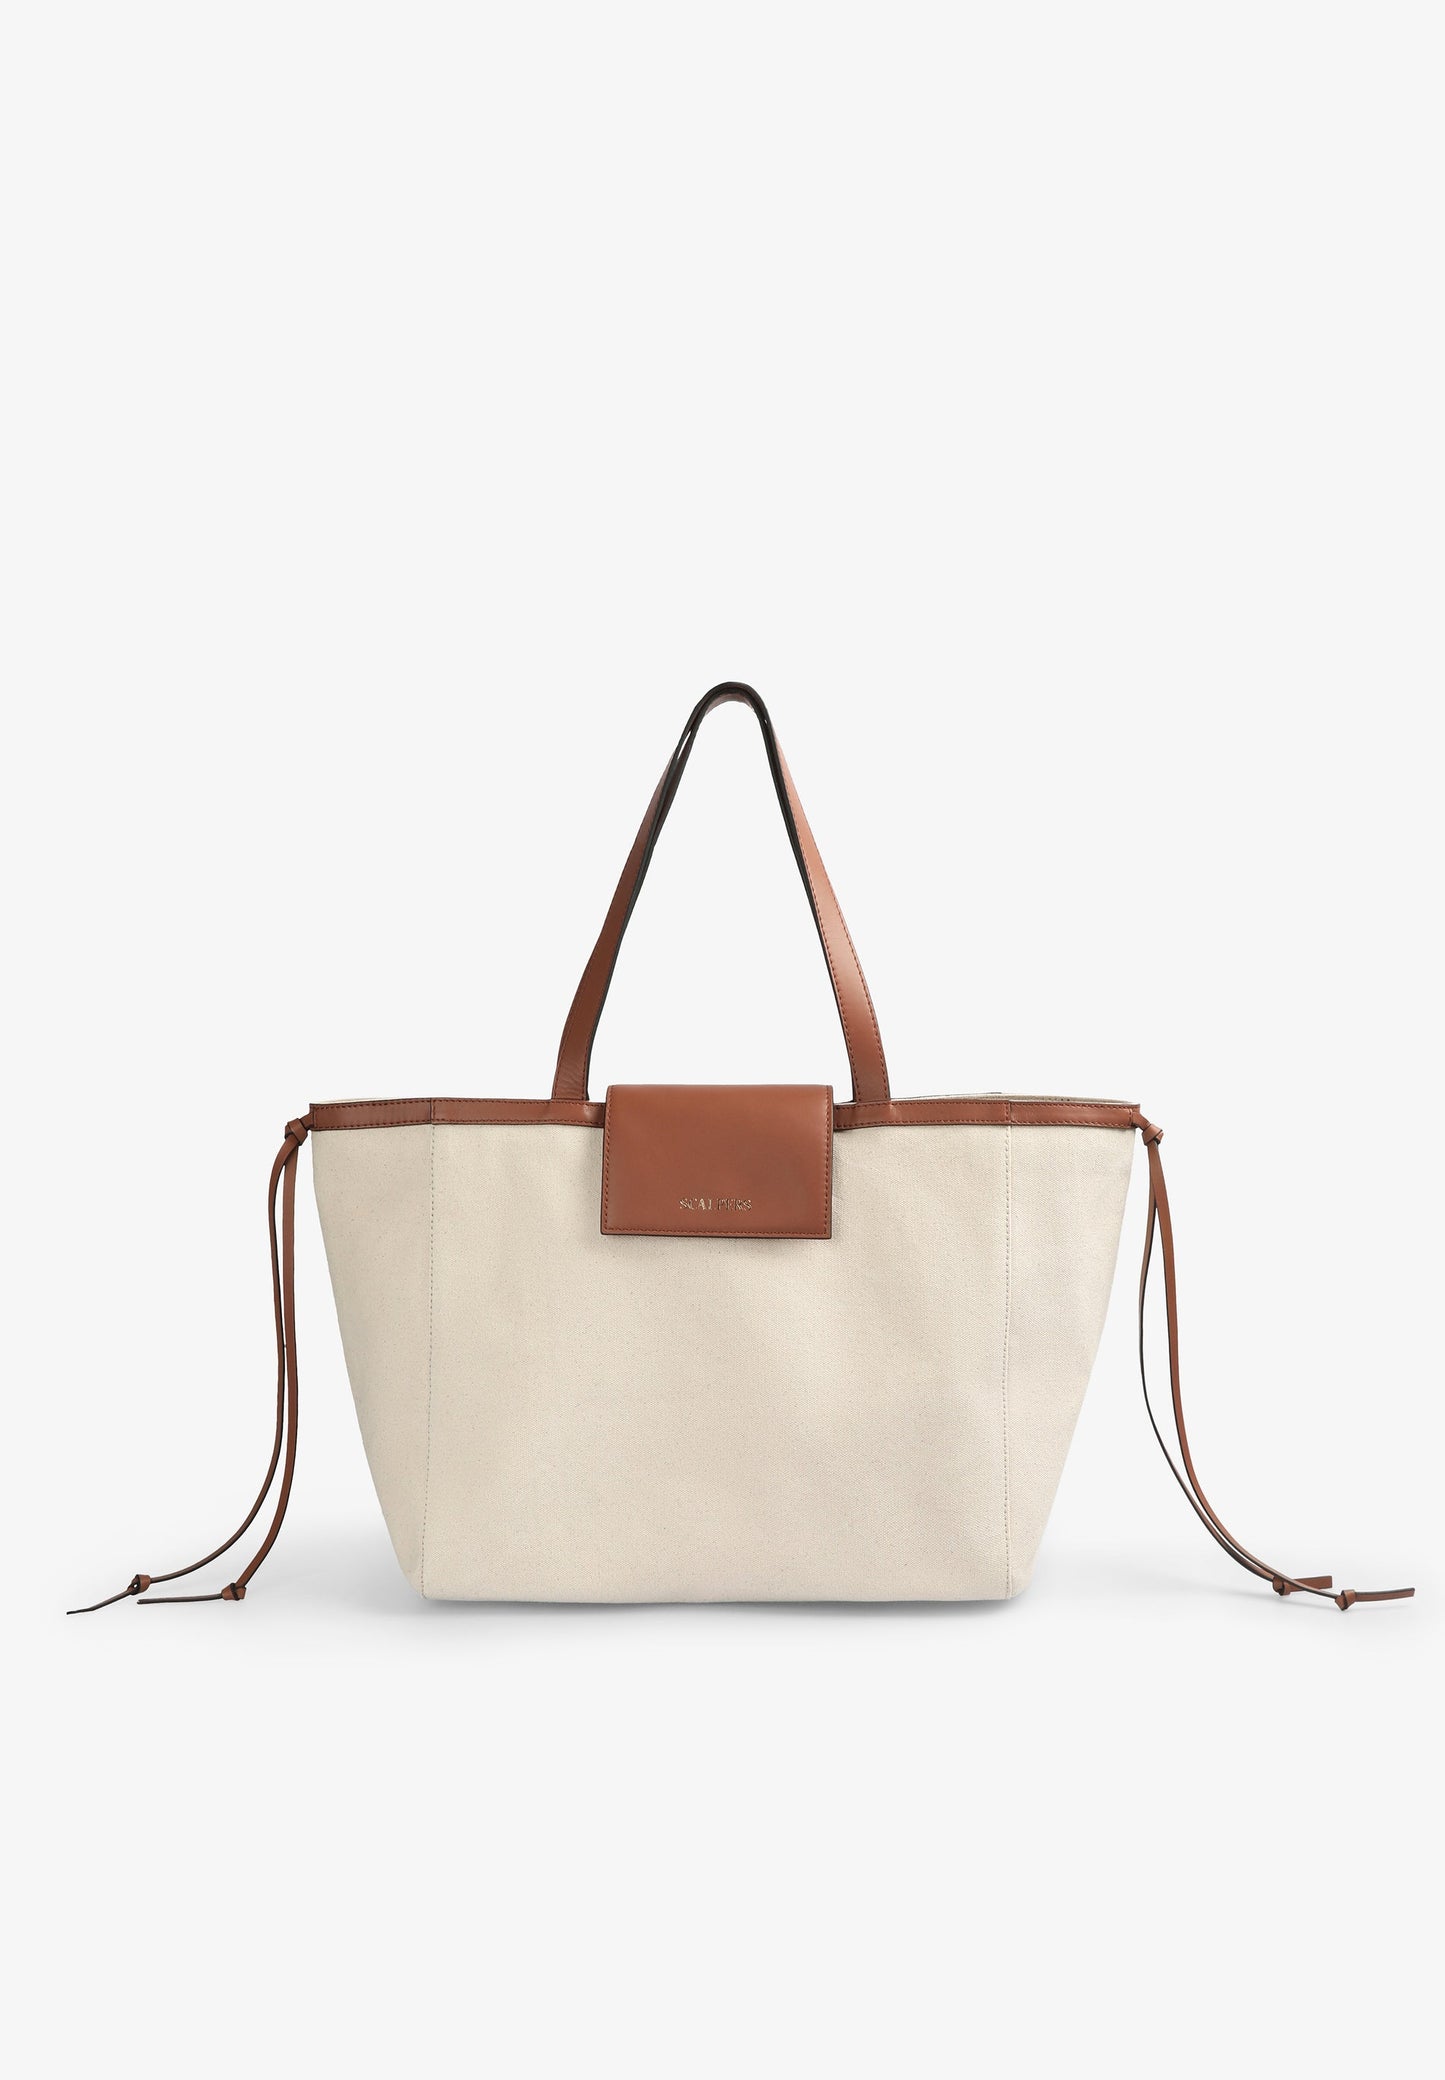 CANVAS TOTE BAG WITH LEATHER DETAILS